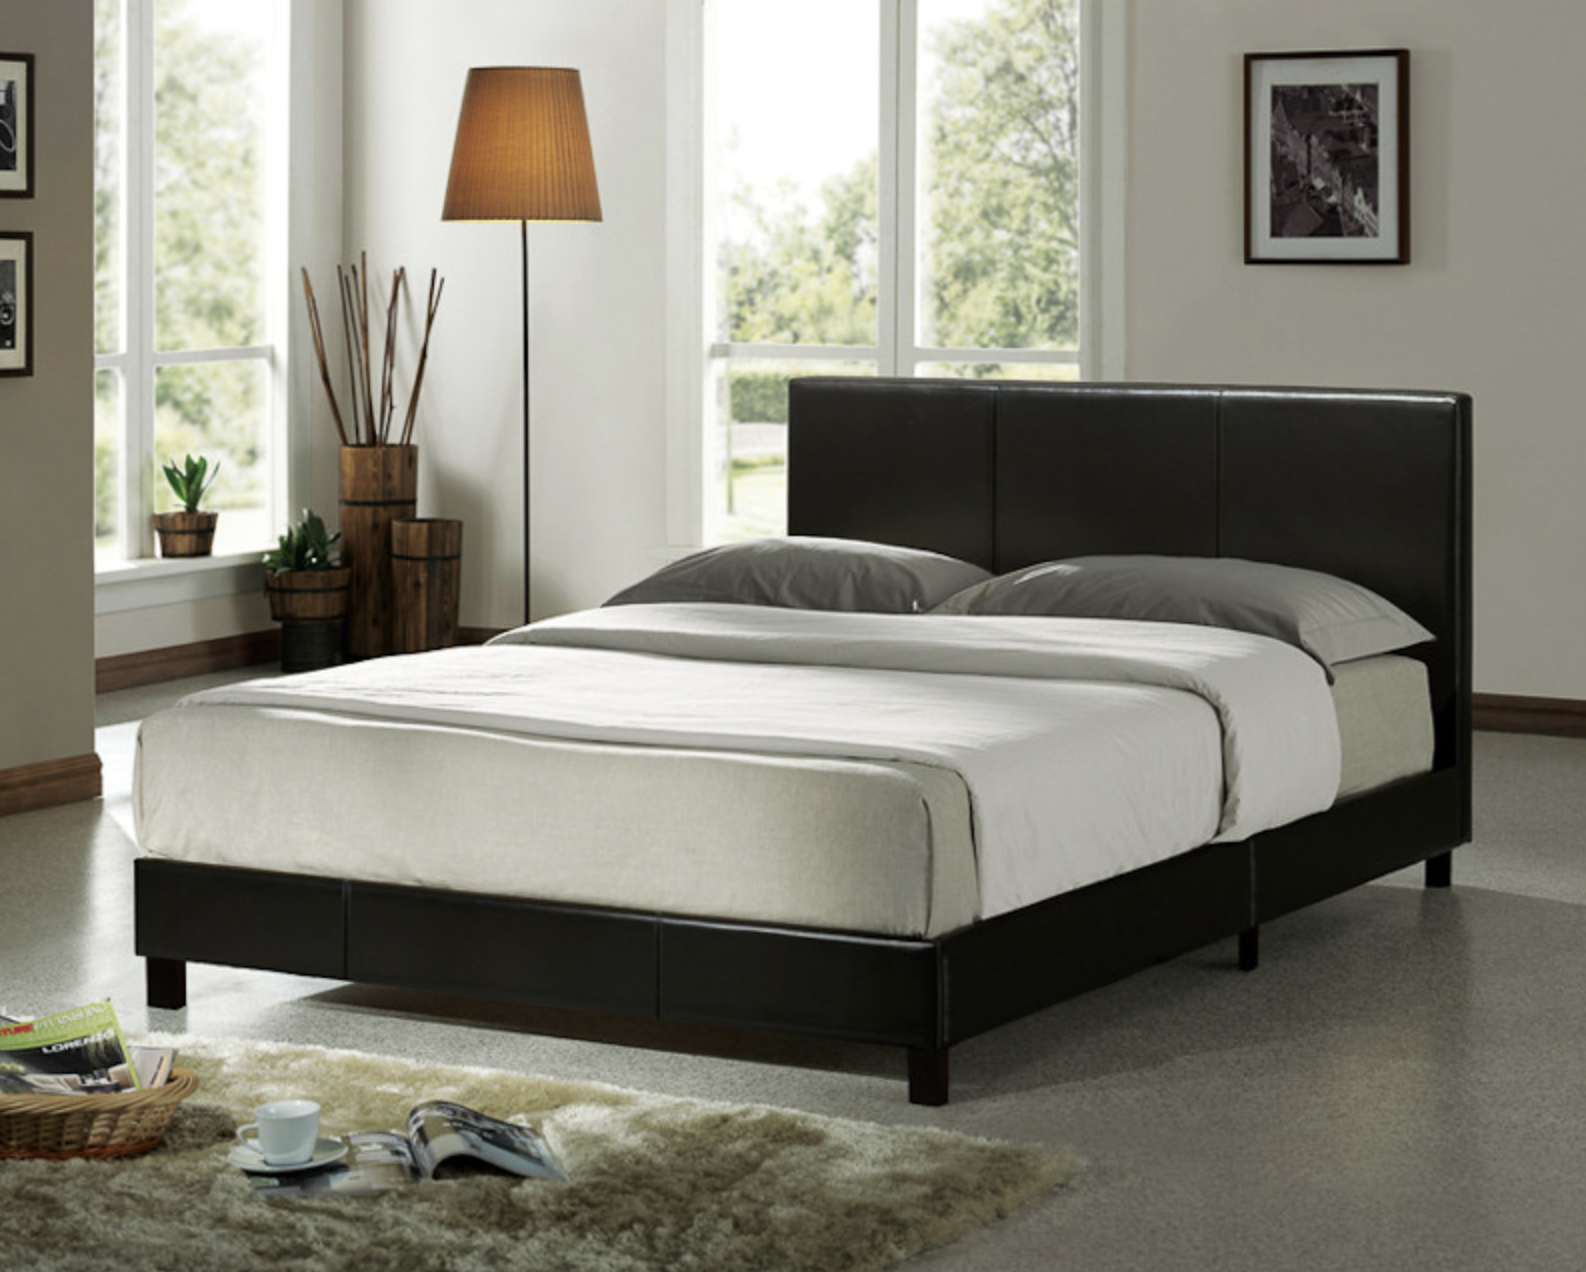 b&m stores furniture bed